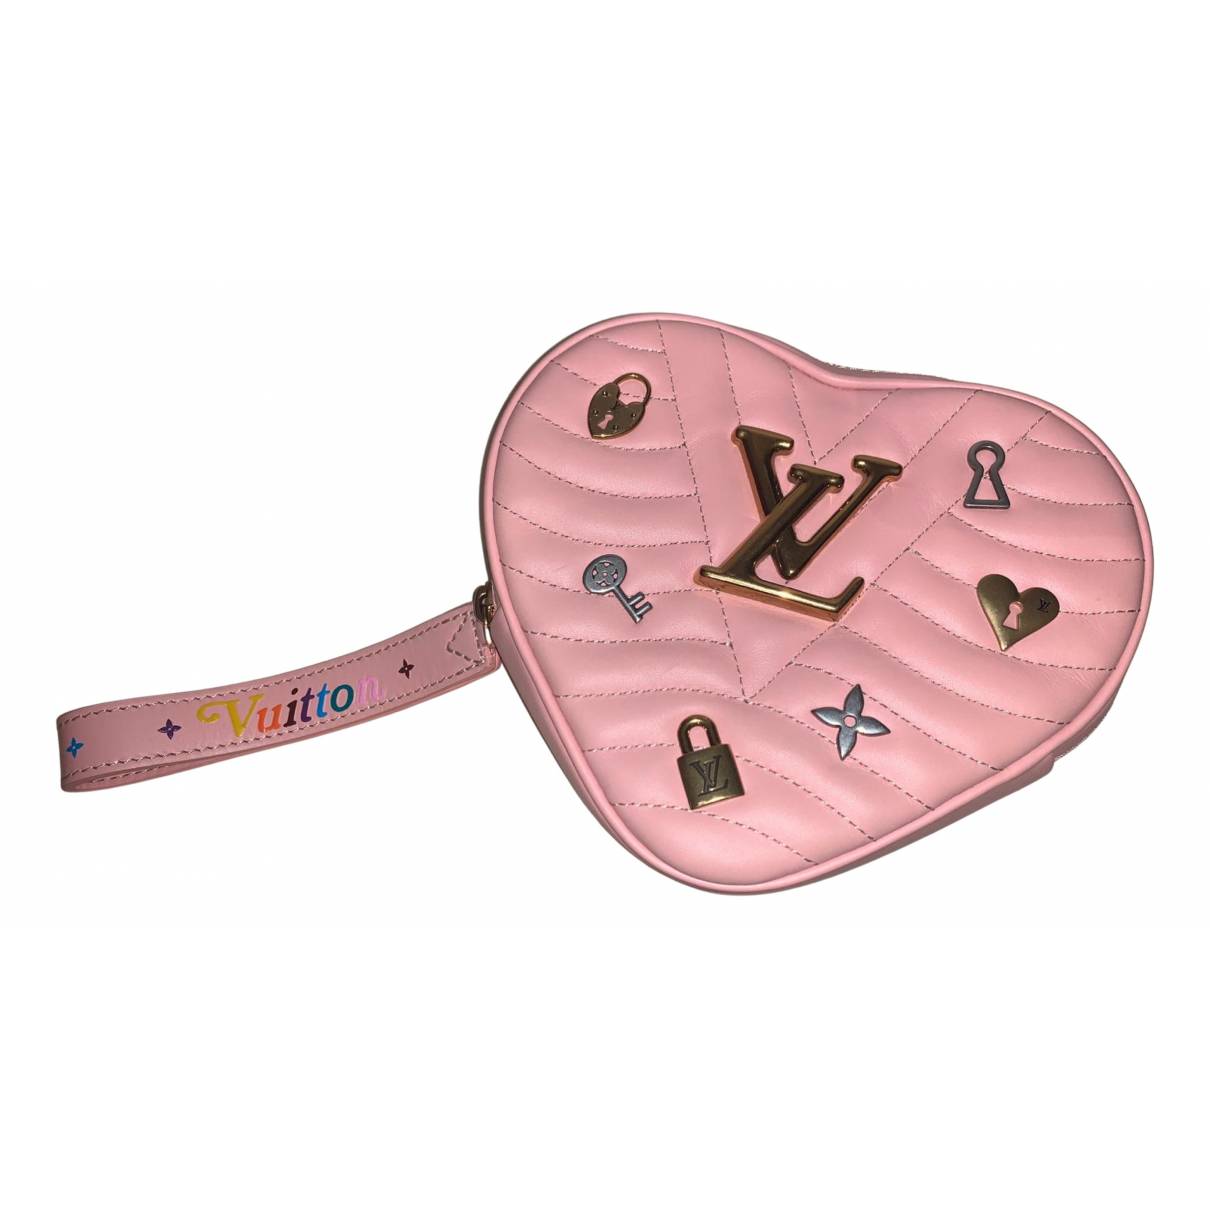 Coeur new wave leather crossbody bag Louis Vuitton Pink in Leather